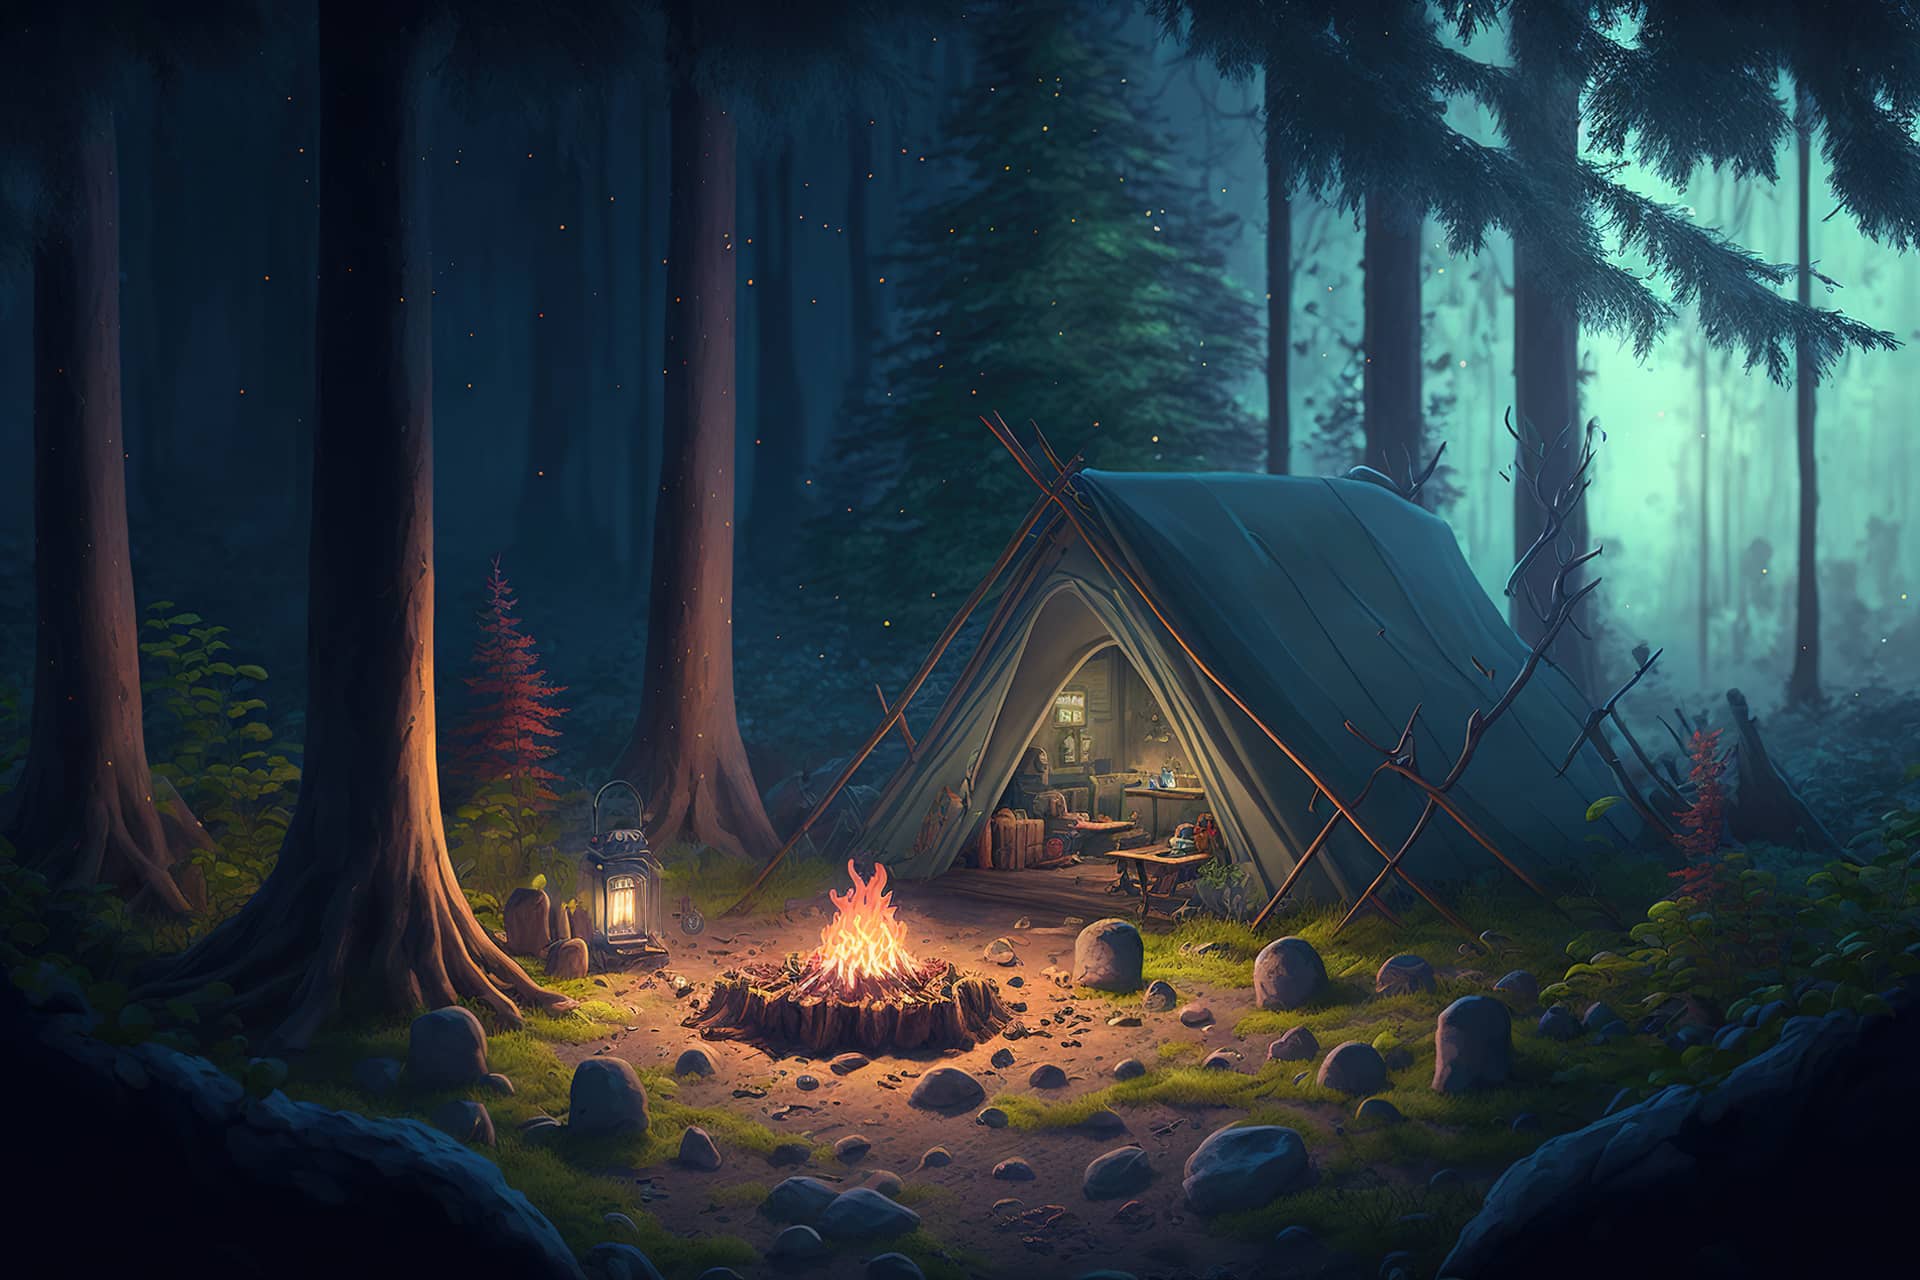 Camping night forest with camp fire excellent picture